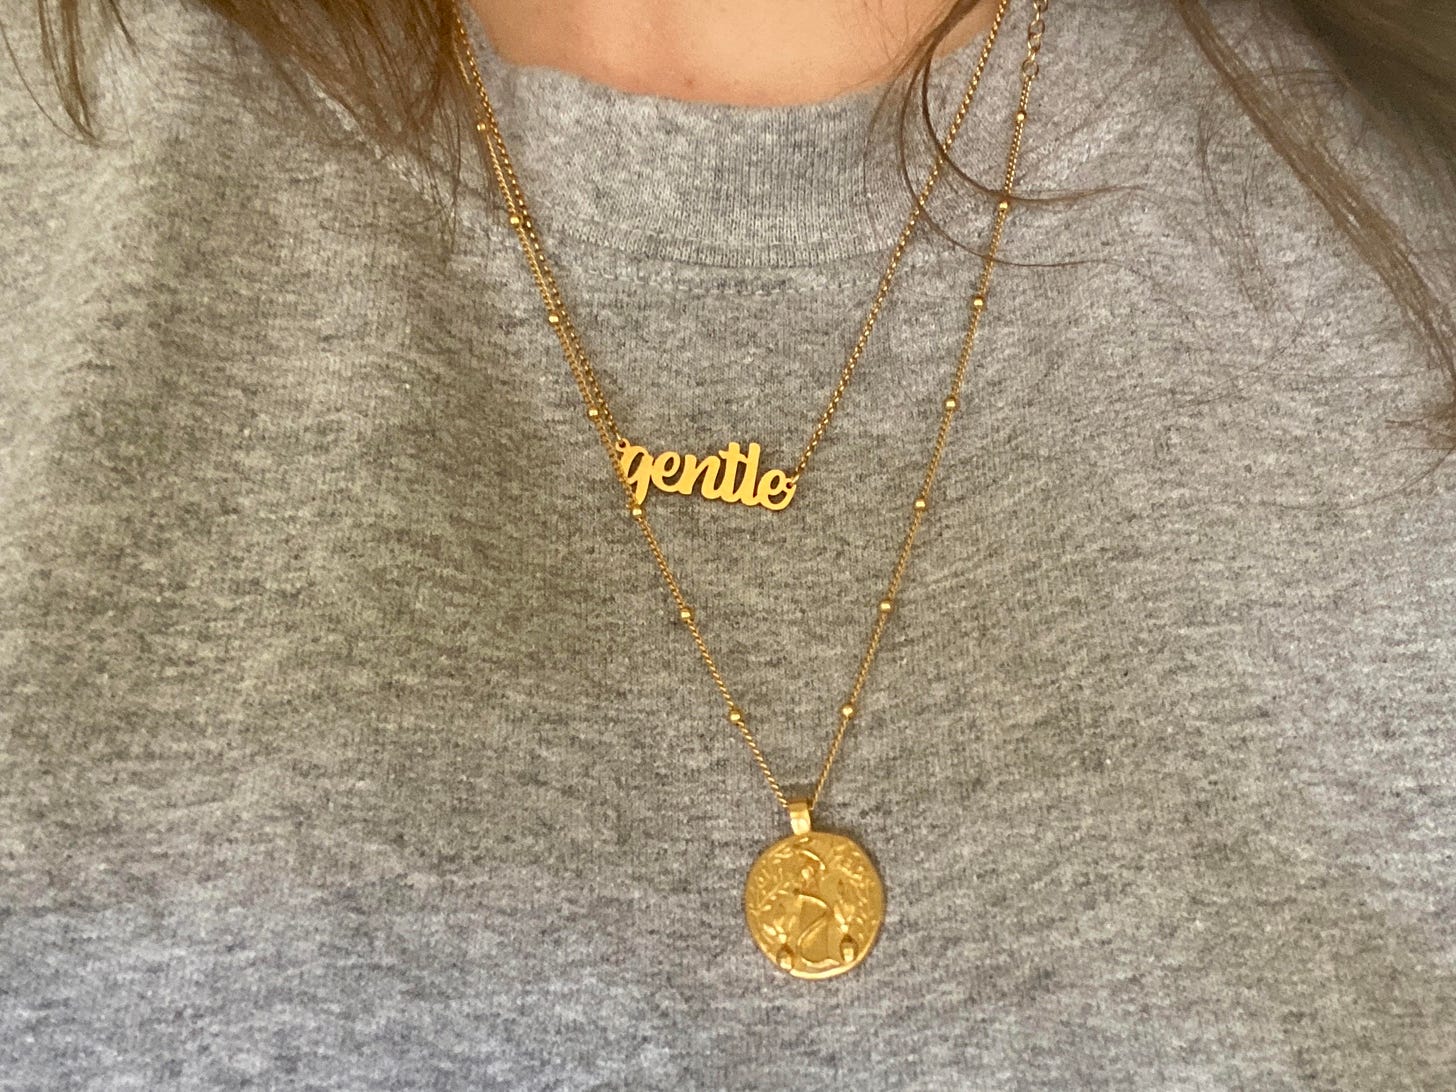 a photo of my chest wearing a gray sweatshirt with two gold necklaces. one says gentle and one is gold coin.